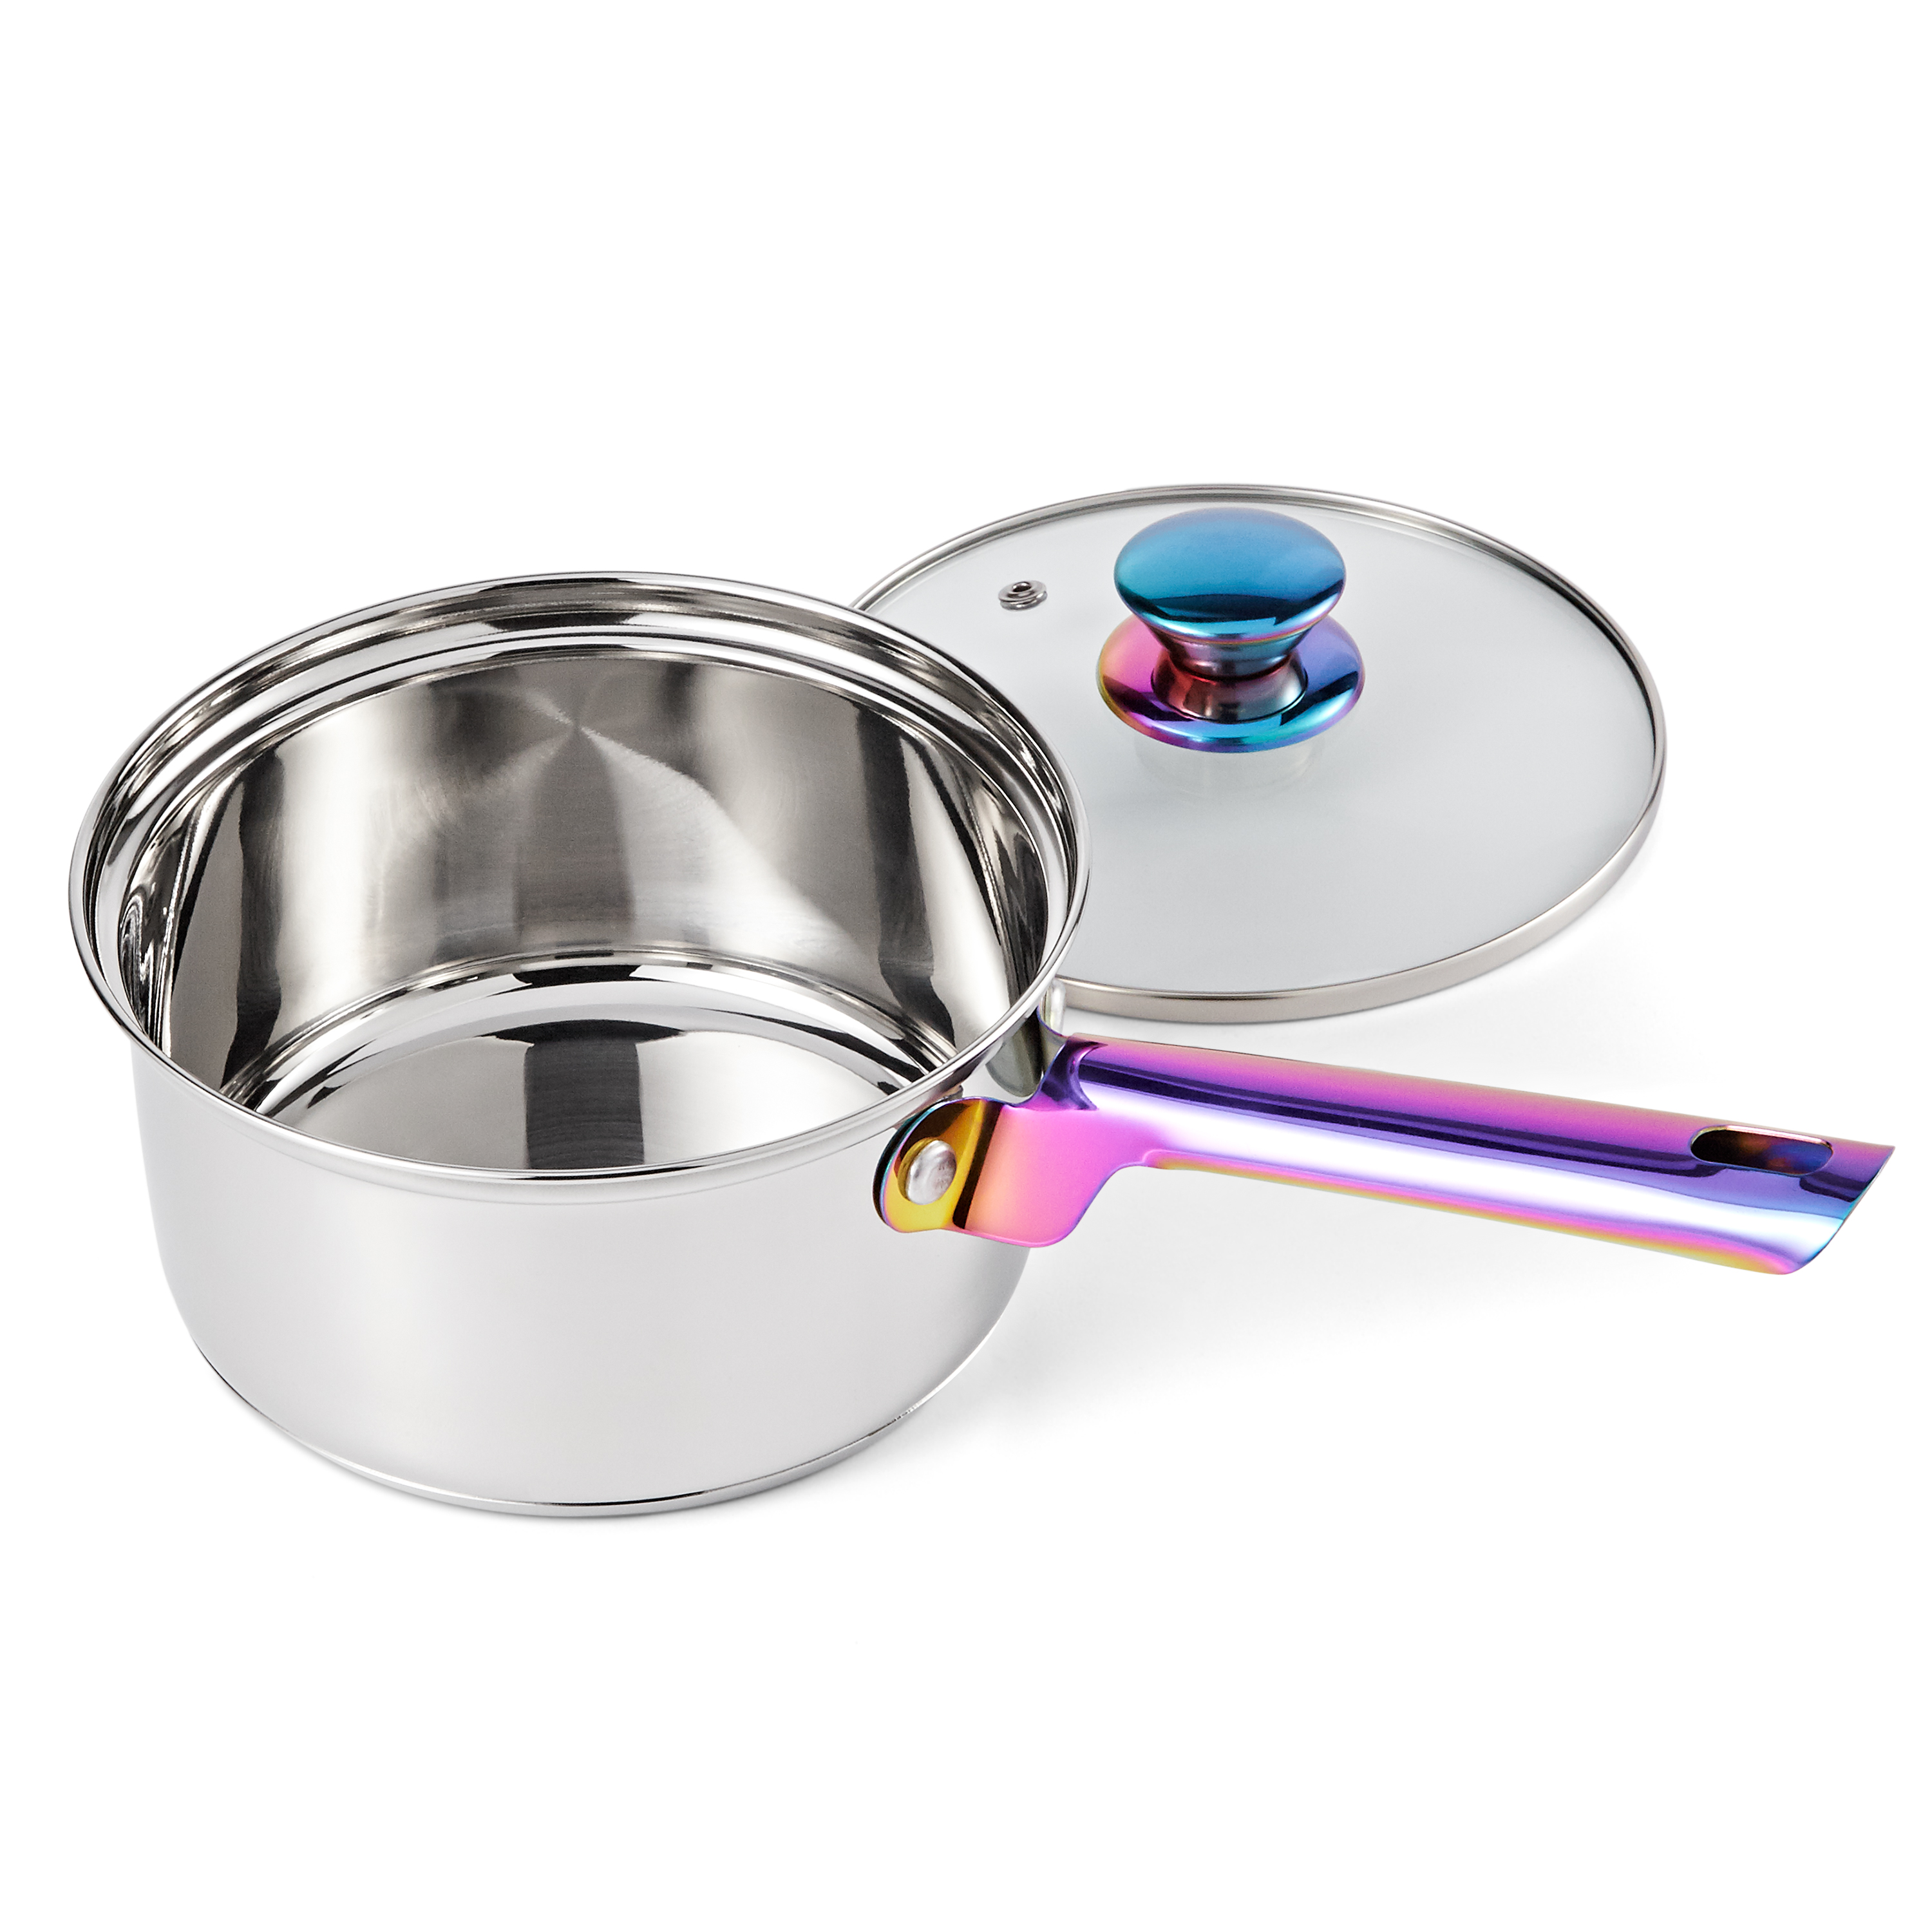 Mainstays Iridescent Stainless Steel 20-Piece Cookware Set, with Kitchen Utensils and Tools - image 5 of 9